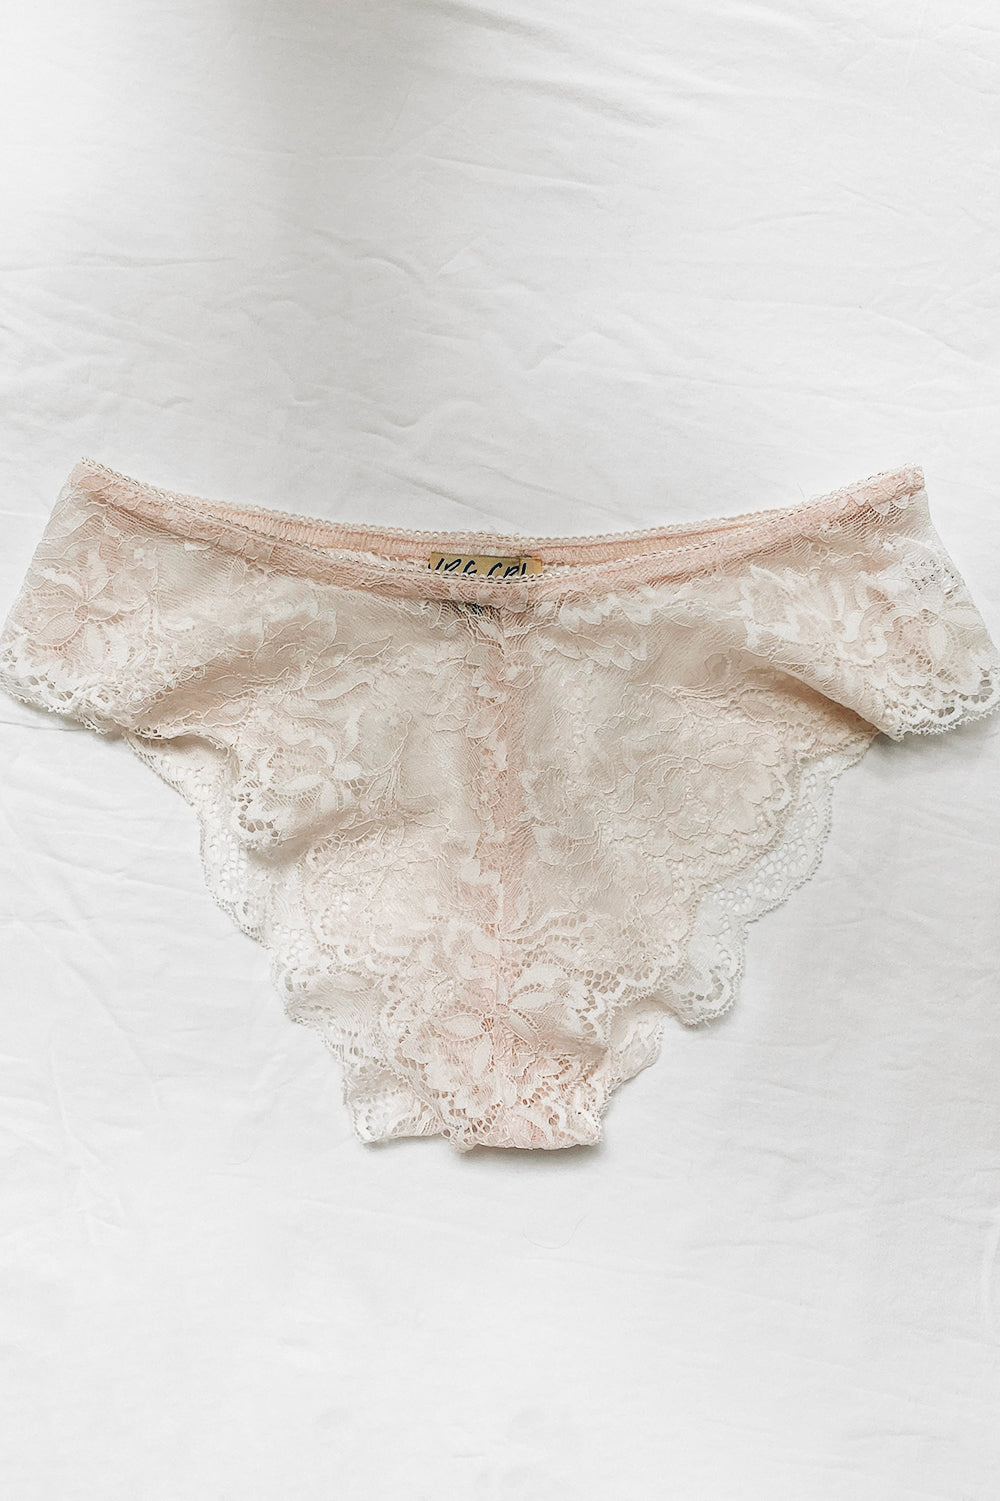 VRG GRL Crave You Lace Undies // Peach – Verge Girl